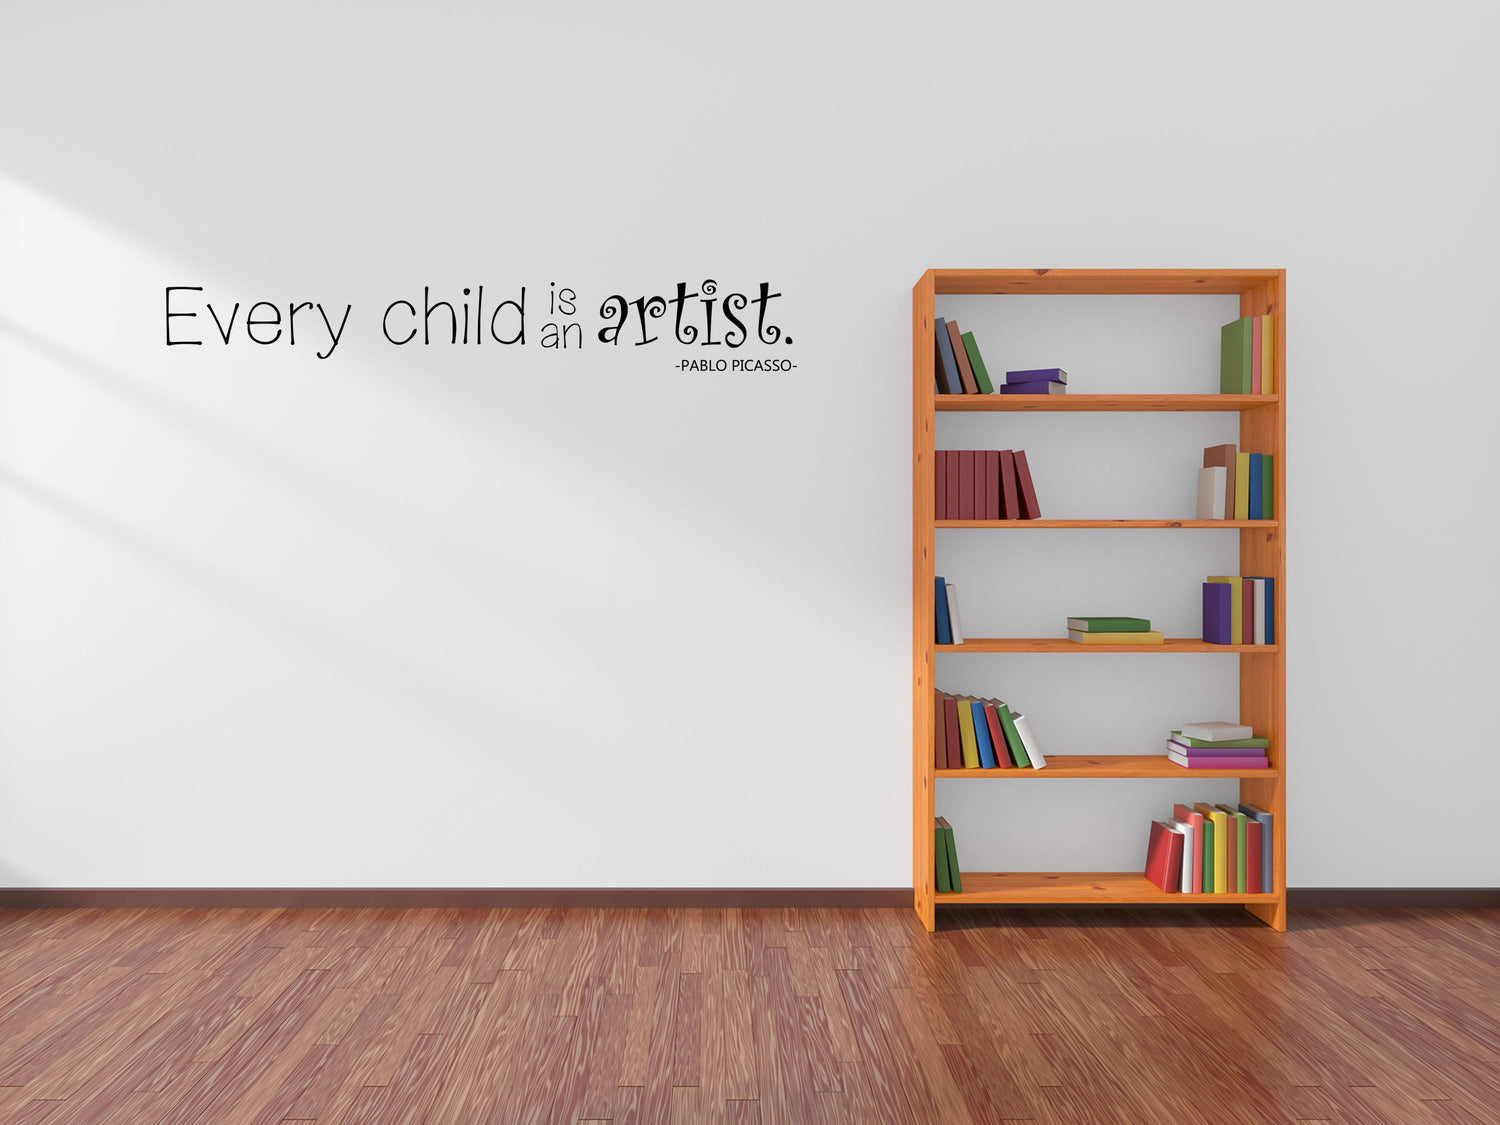 Every Child Is An Artist Vinyl Wall Decal Vinyl Wall Decal Inspirational Wall Signs 